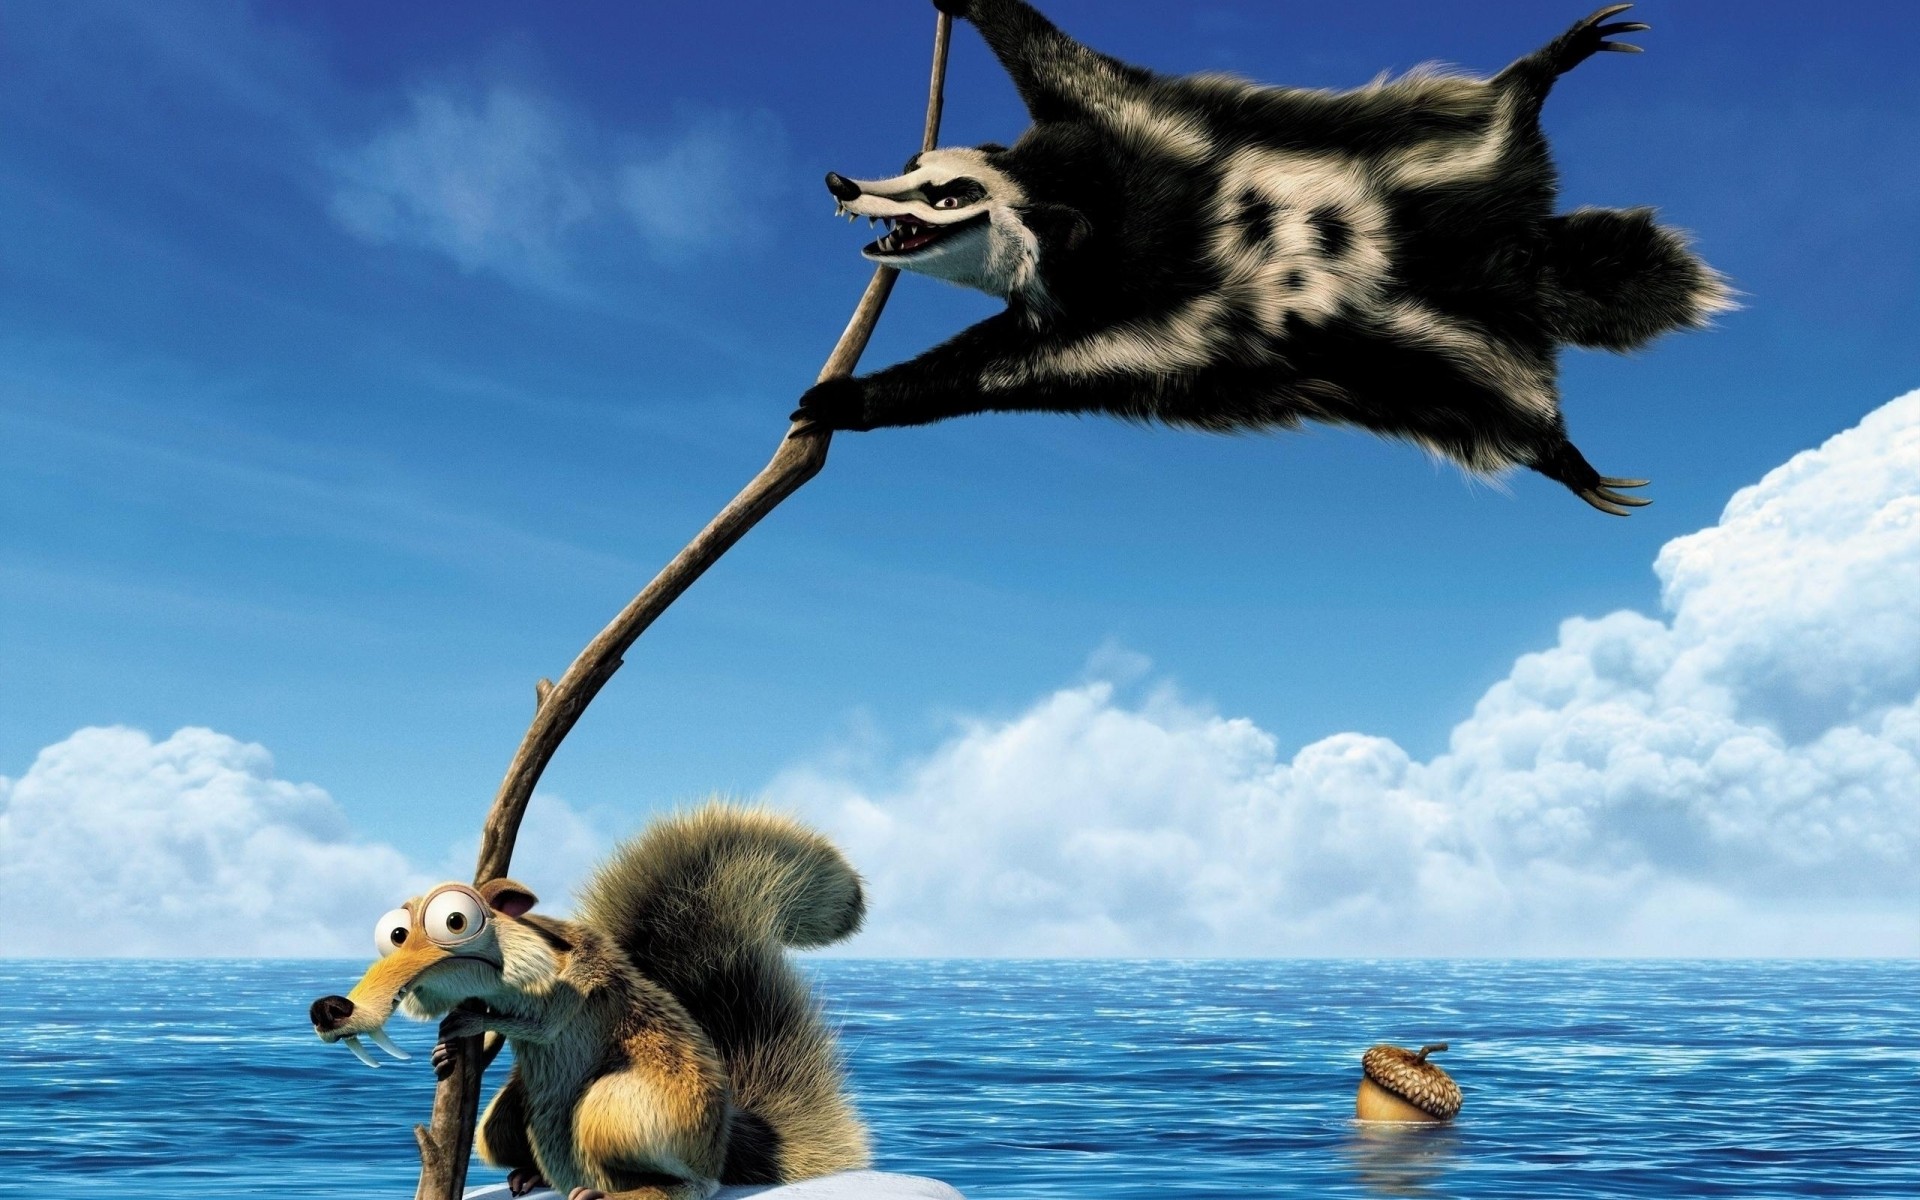 movies water outdoors mammal nature one animal sea wildlife sky hangs tail fangs funny scarry